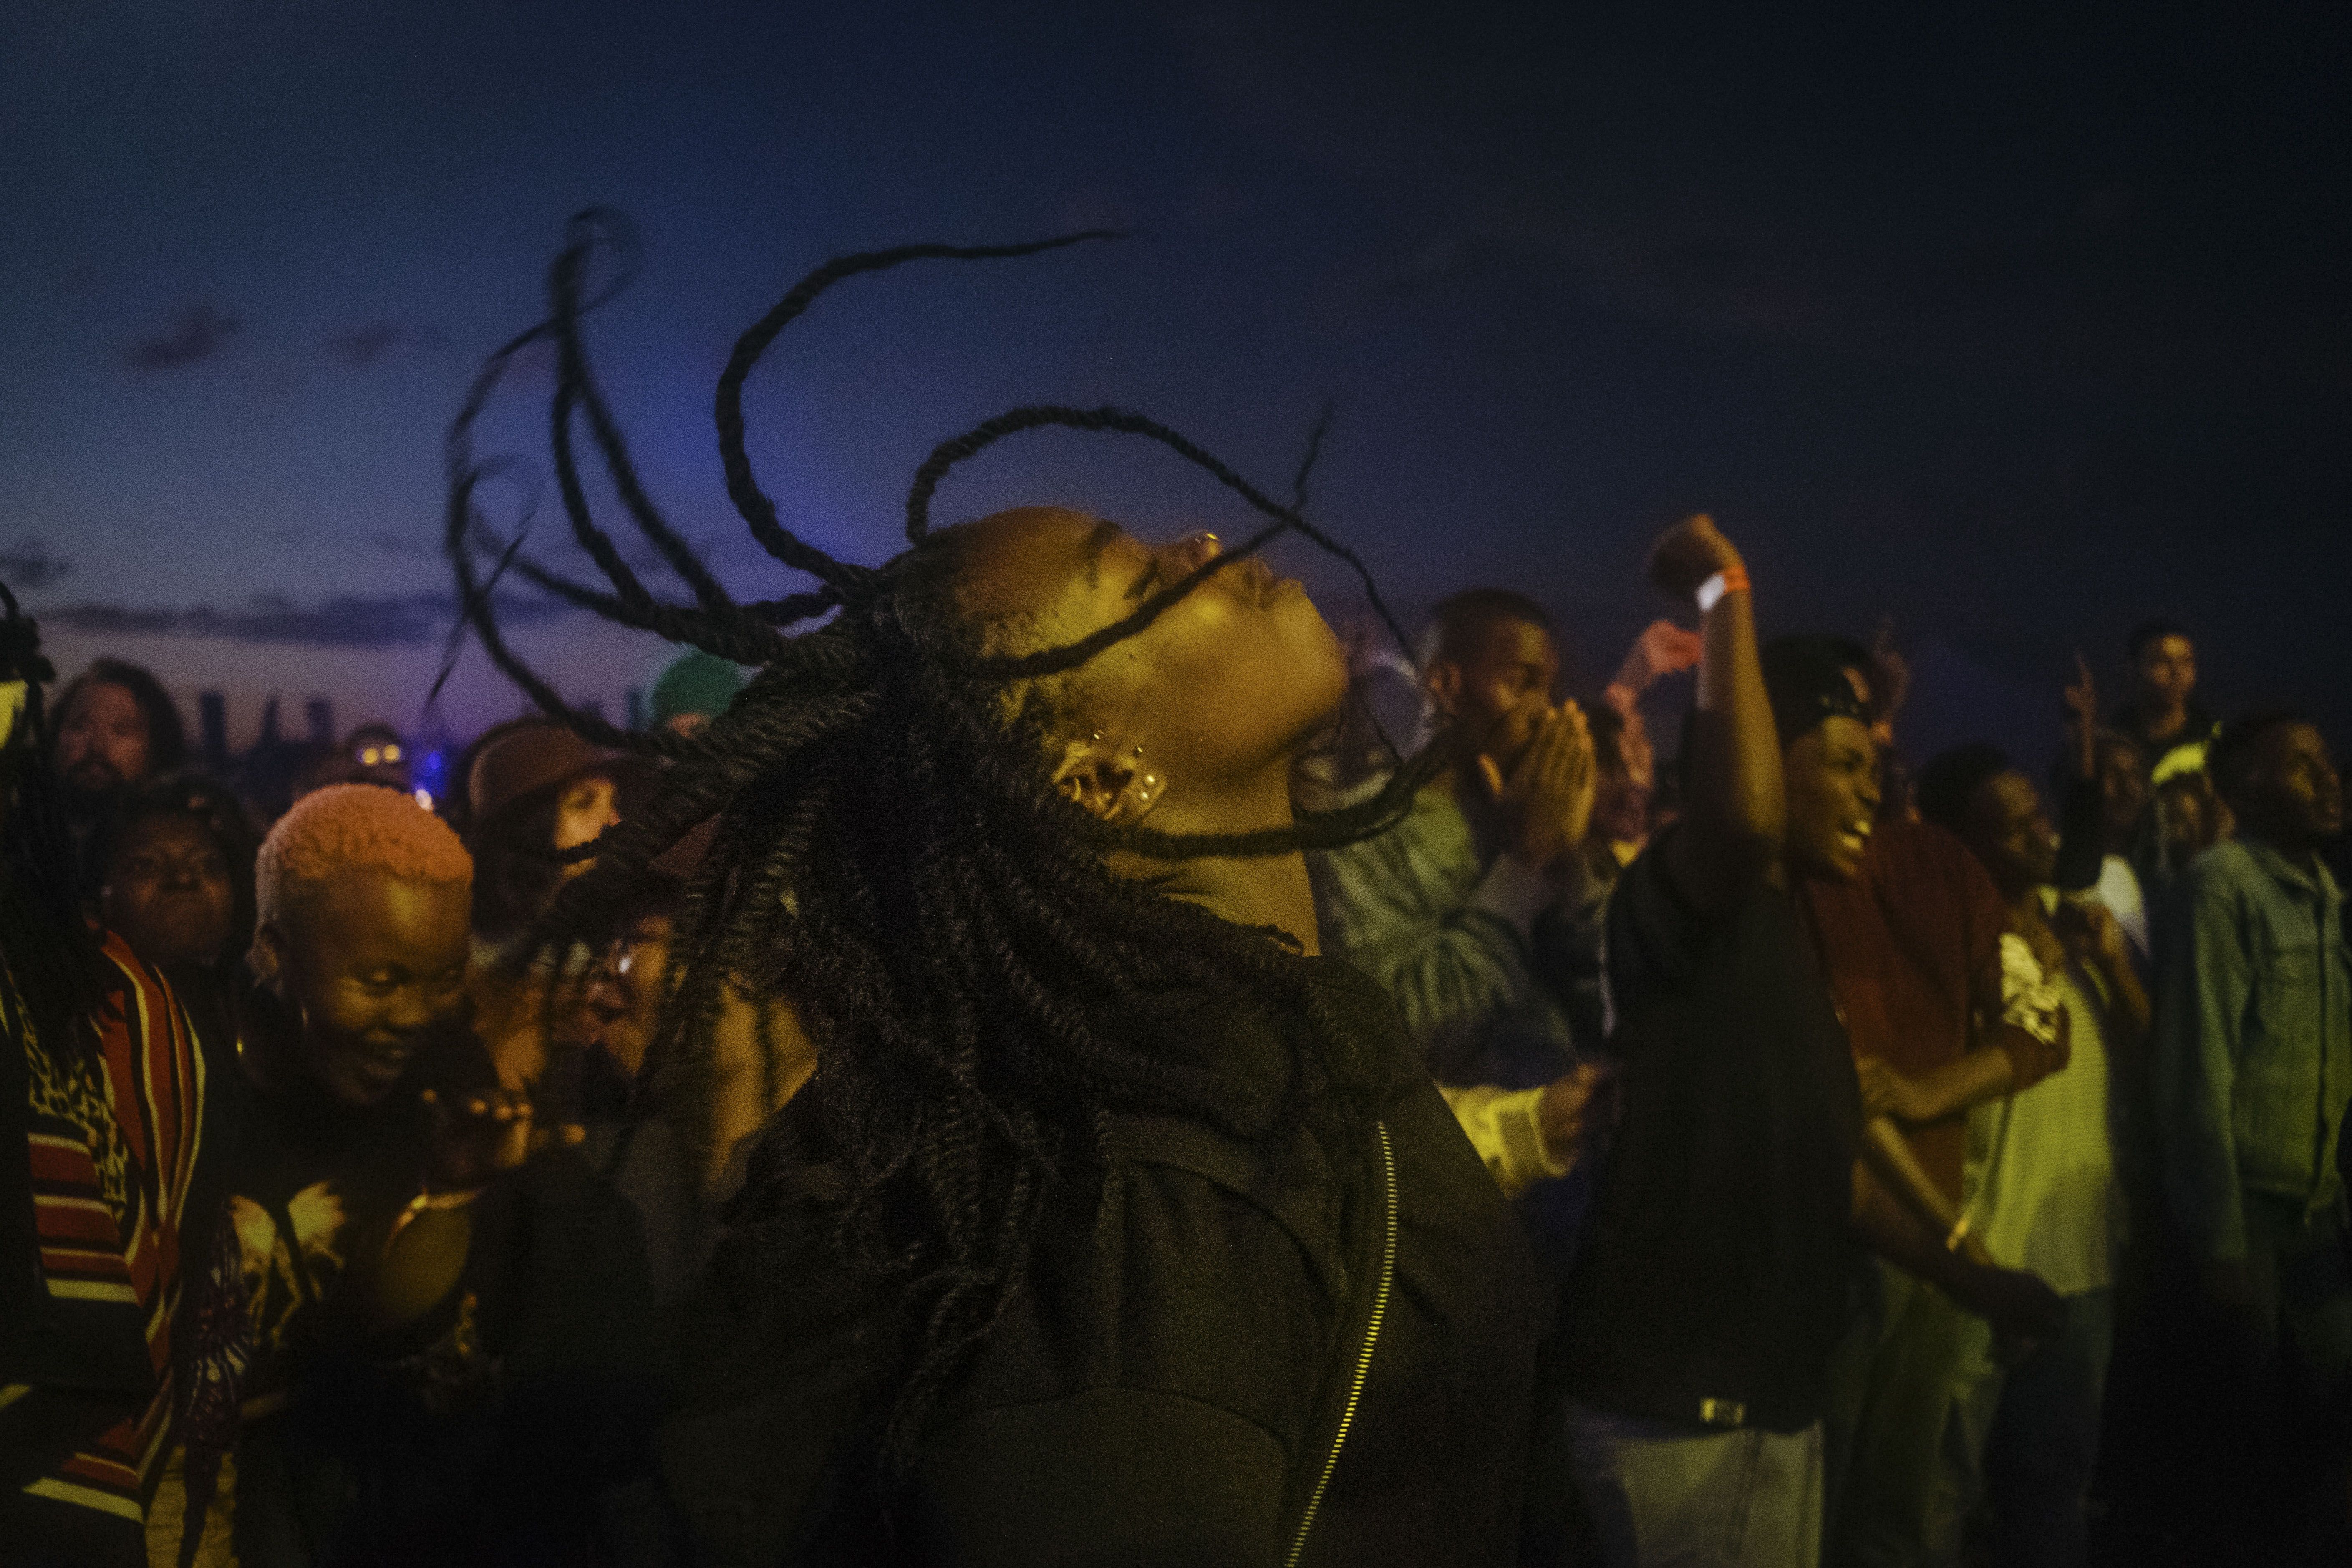 A music fan dances in a mosh pit at the African debut event of the Afropunk music festival hosted at Constitution Hill in Johannesburg. Image by Melissa Bunni Elian. South Africa, 2017.